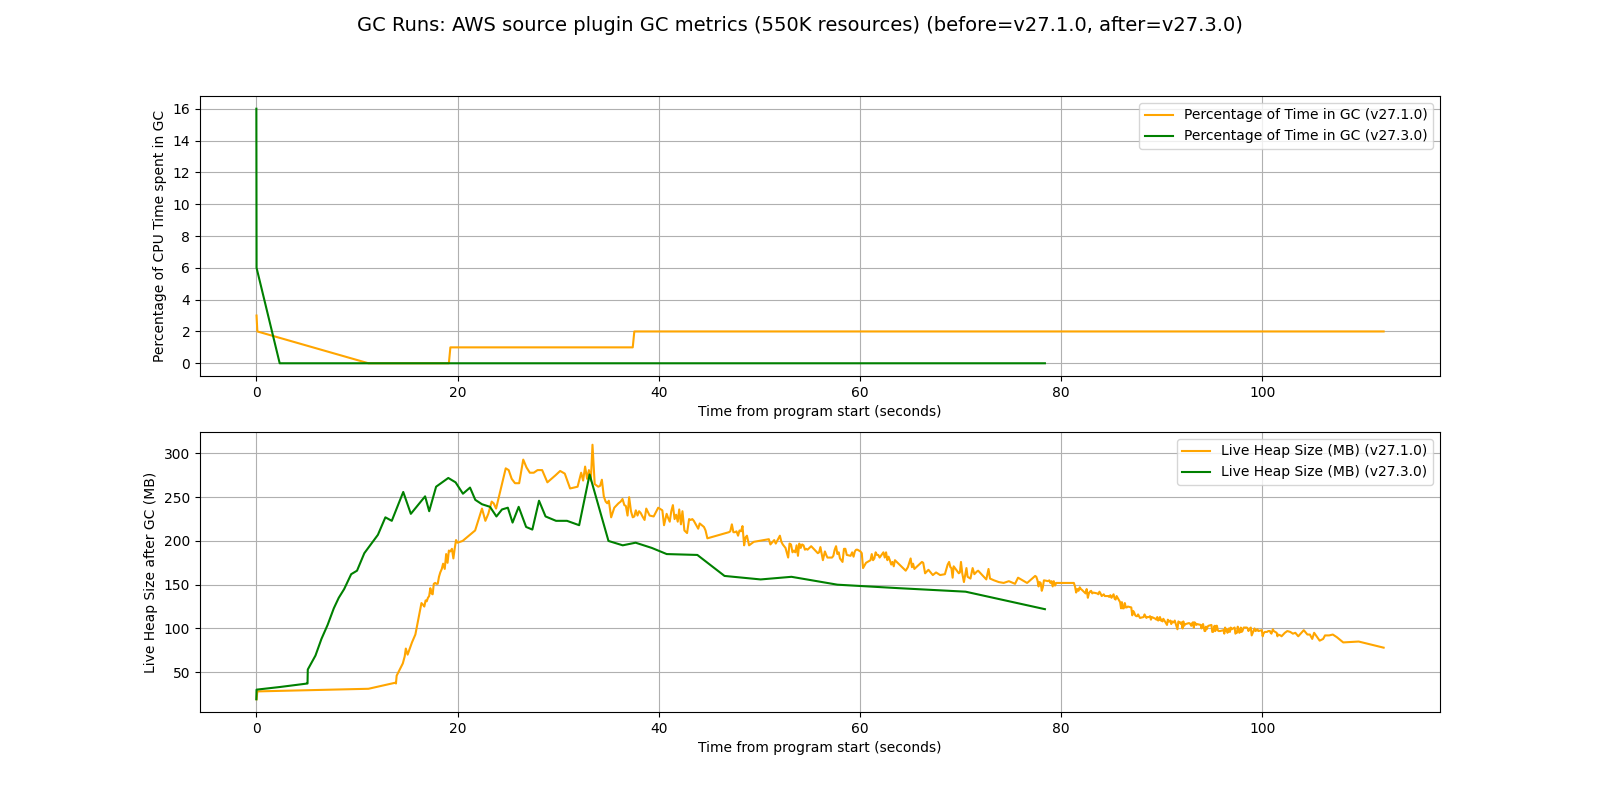 Graph showing AWS source plugin GC metrics comparing version v27.1.0 and v27.3.0 syncing 550 thousand resources. The metrics include percentage of CPU time spent in GC and live heap size after GC over time from program start in seconds.